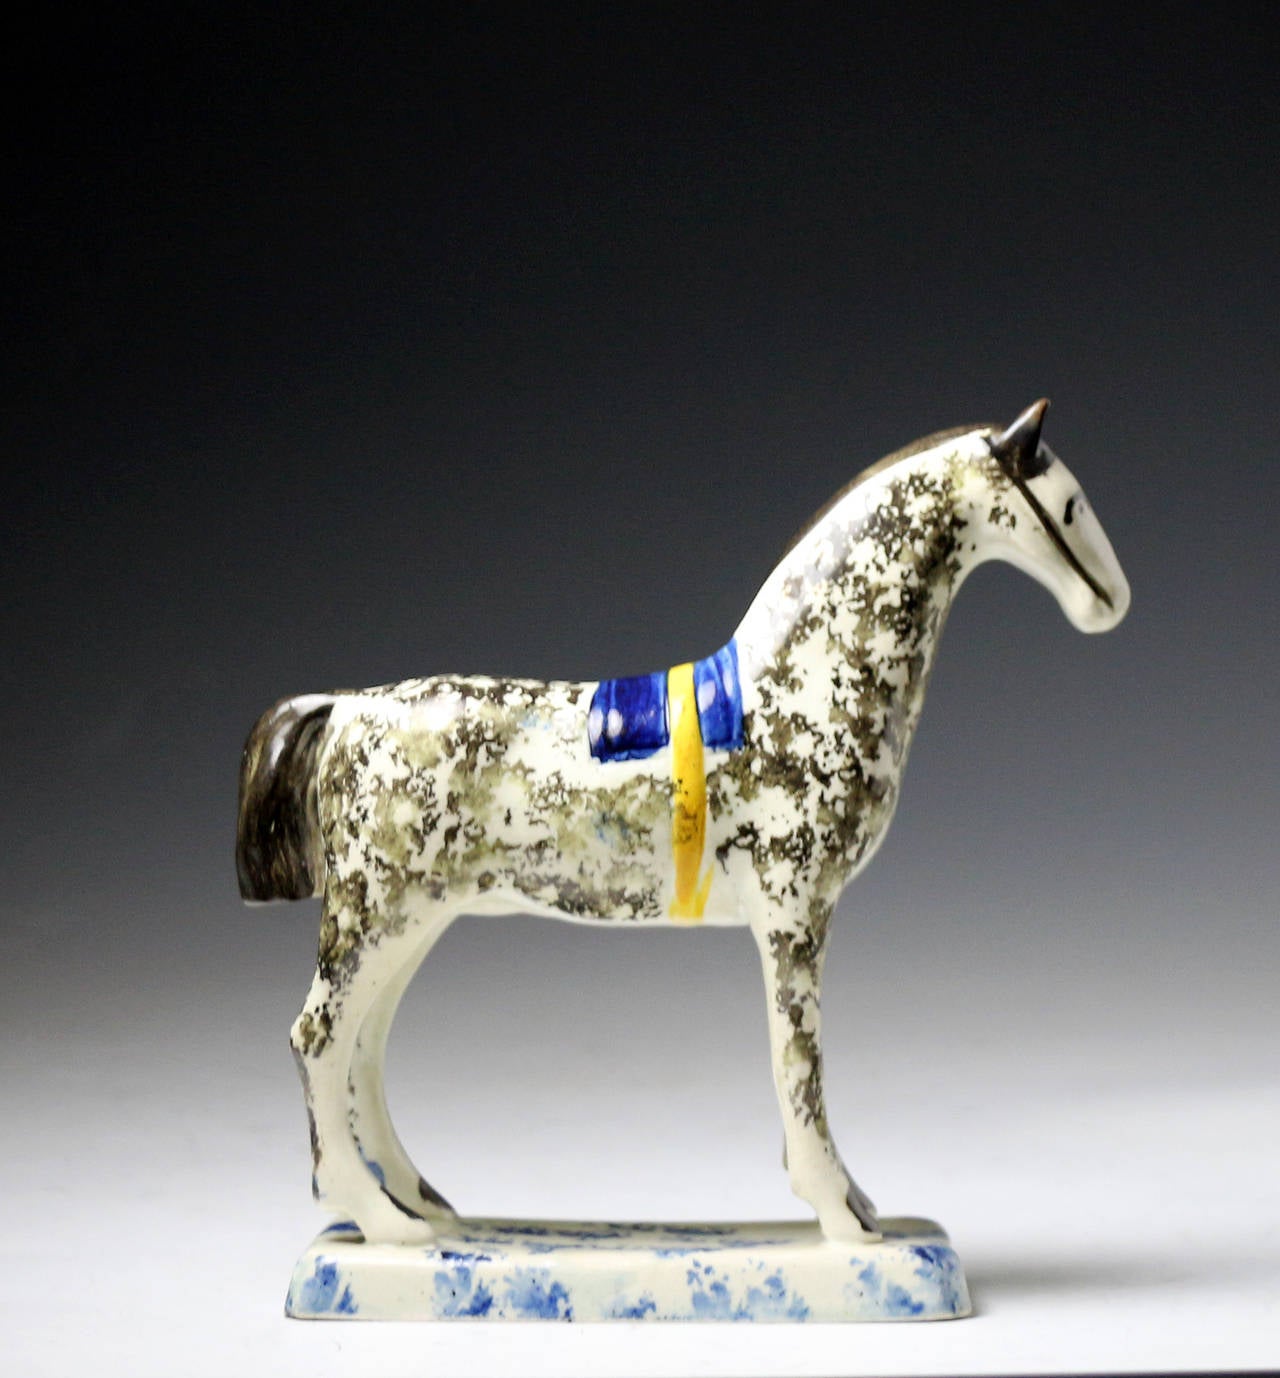 Pearlware glaze pottery figure of horse standing on an oblong base. 
The base and figure which has a blue saddle are sponge decorated. 
The figure has an elegant stance with a handsome charm. 
This rare piece still retains the famous